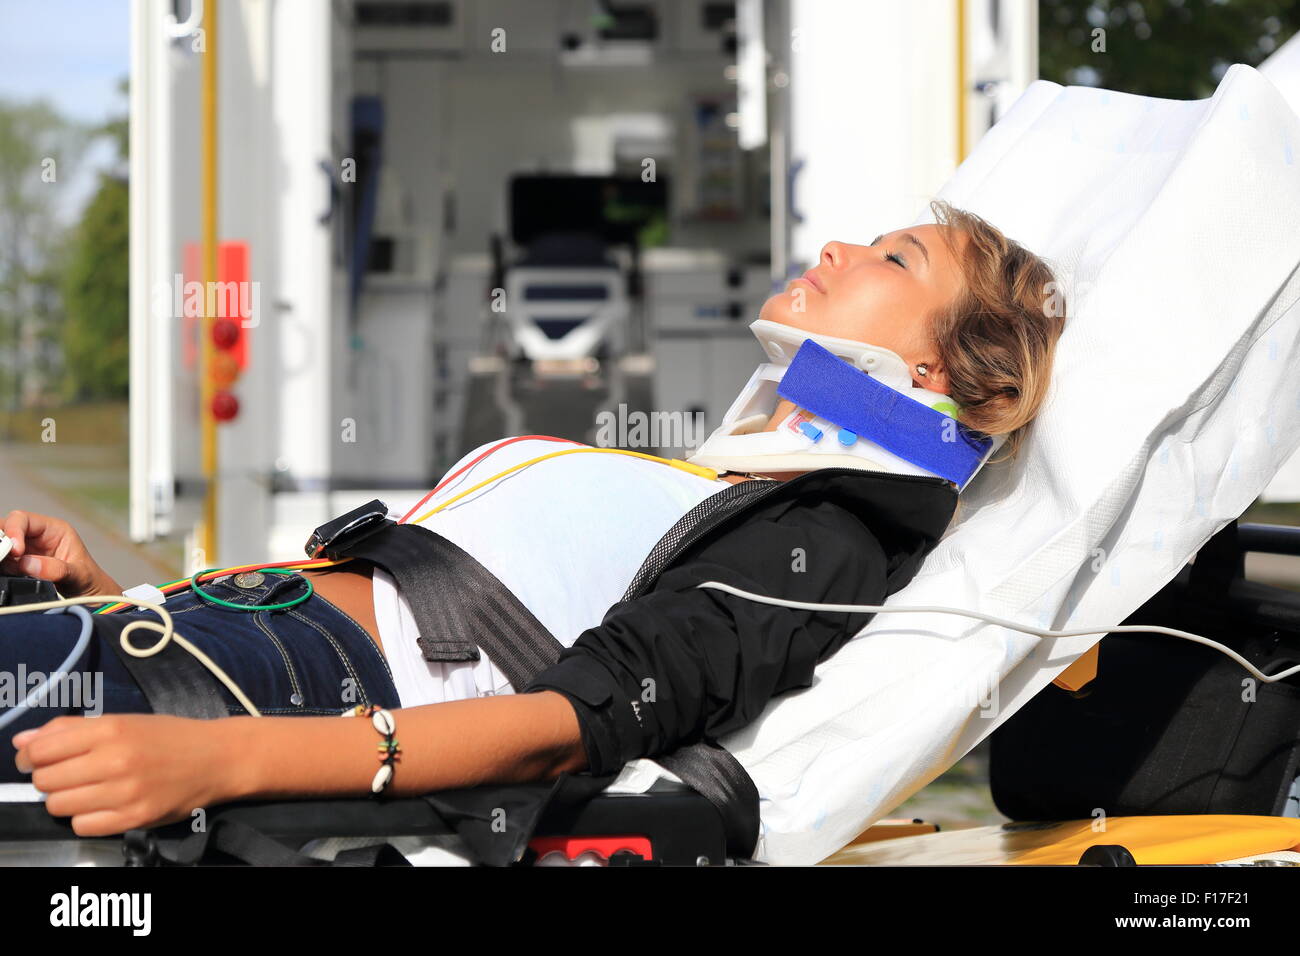 A Woman on stretcher and stifneck before Ambulance car after accident Stock Photo